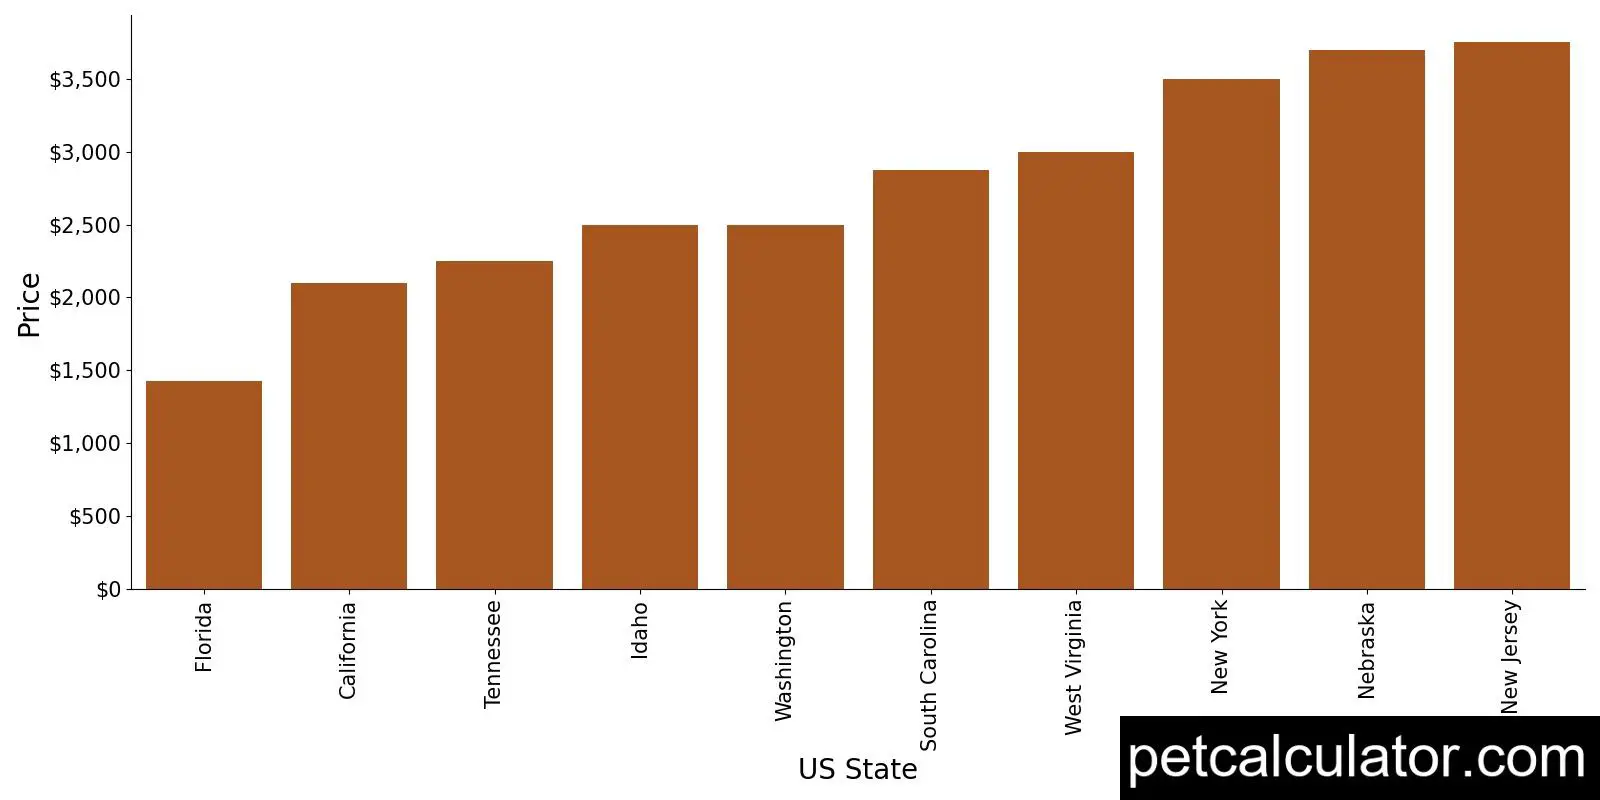 Price of Black Russian Terrier by US State 